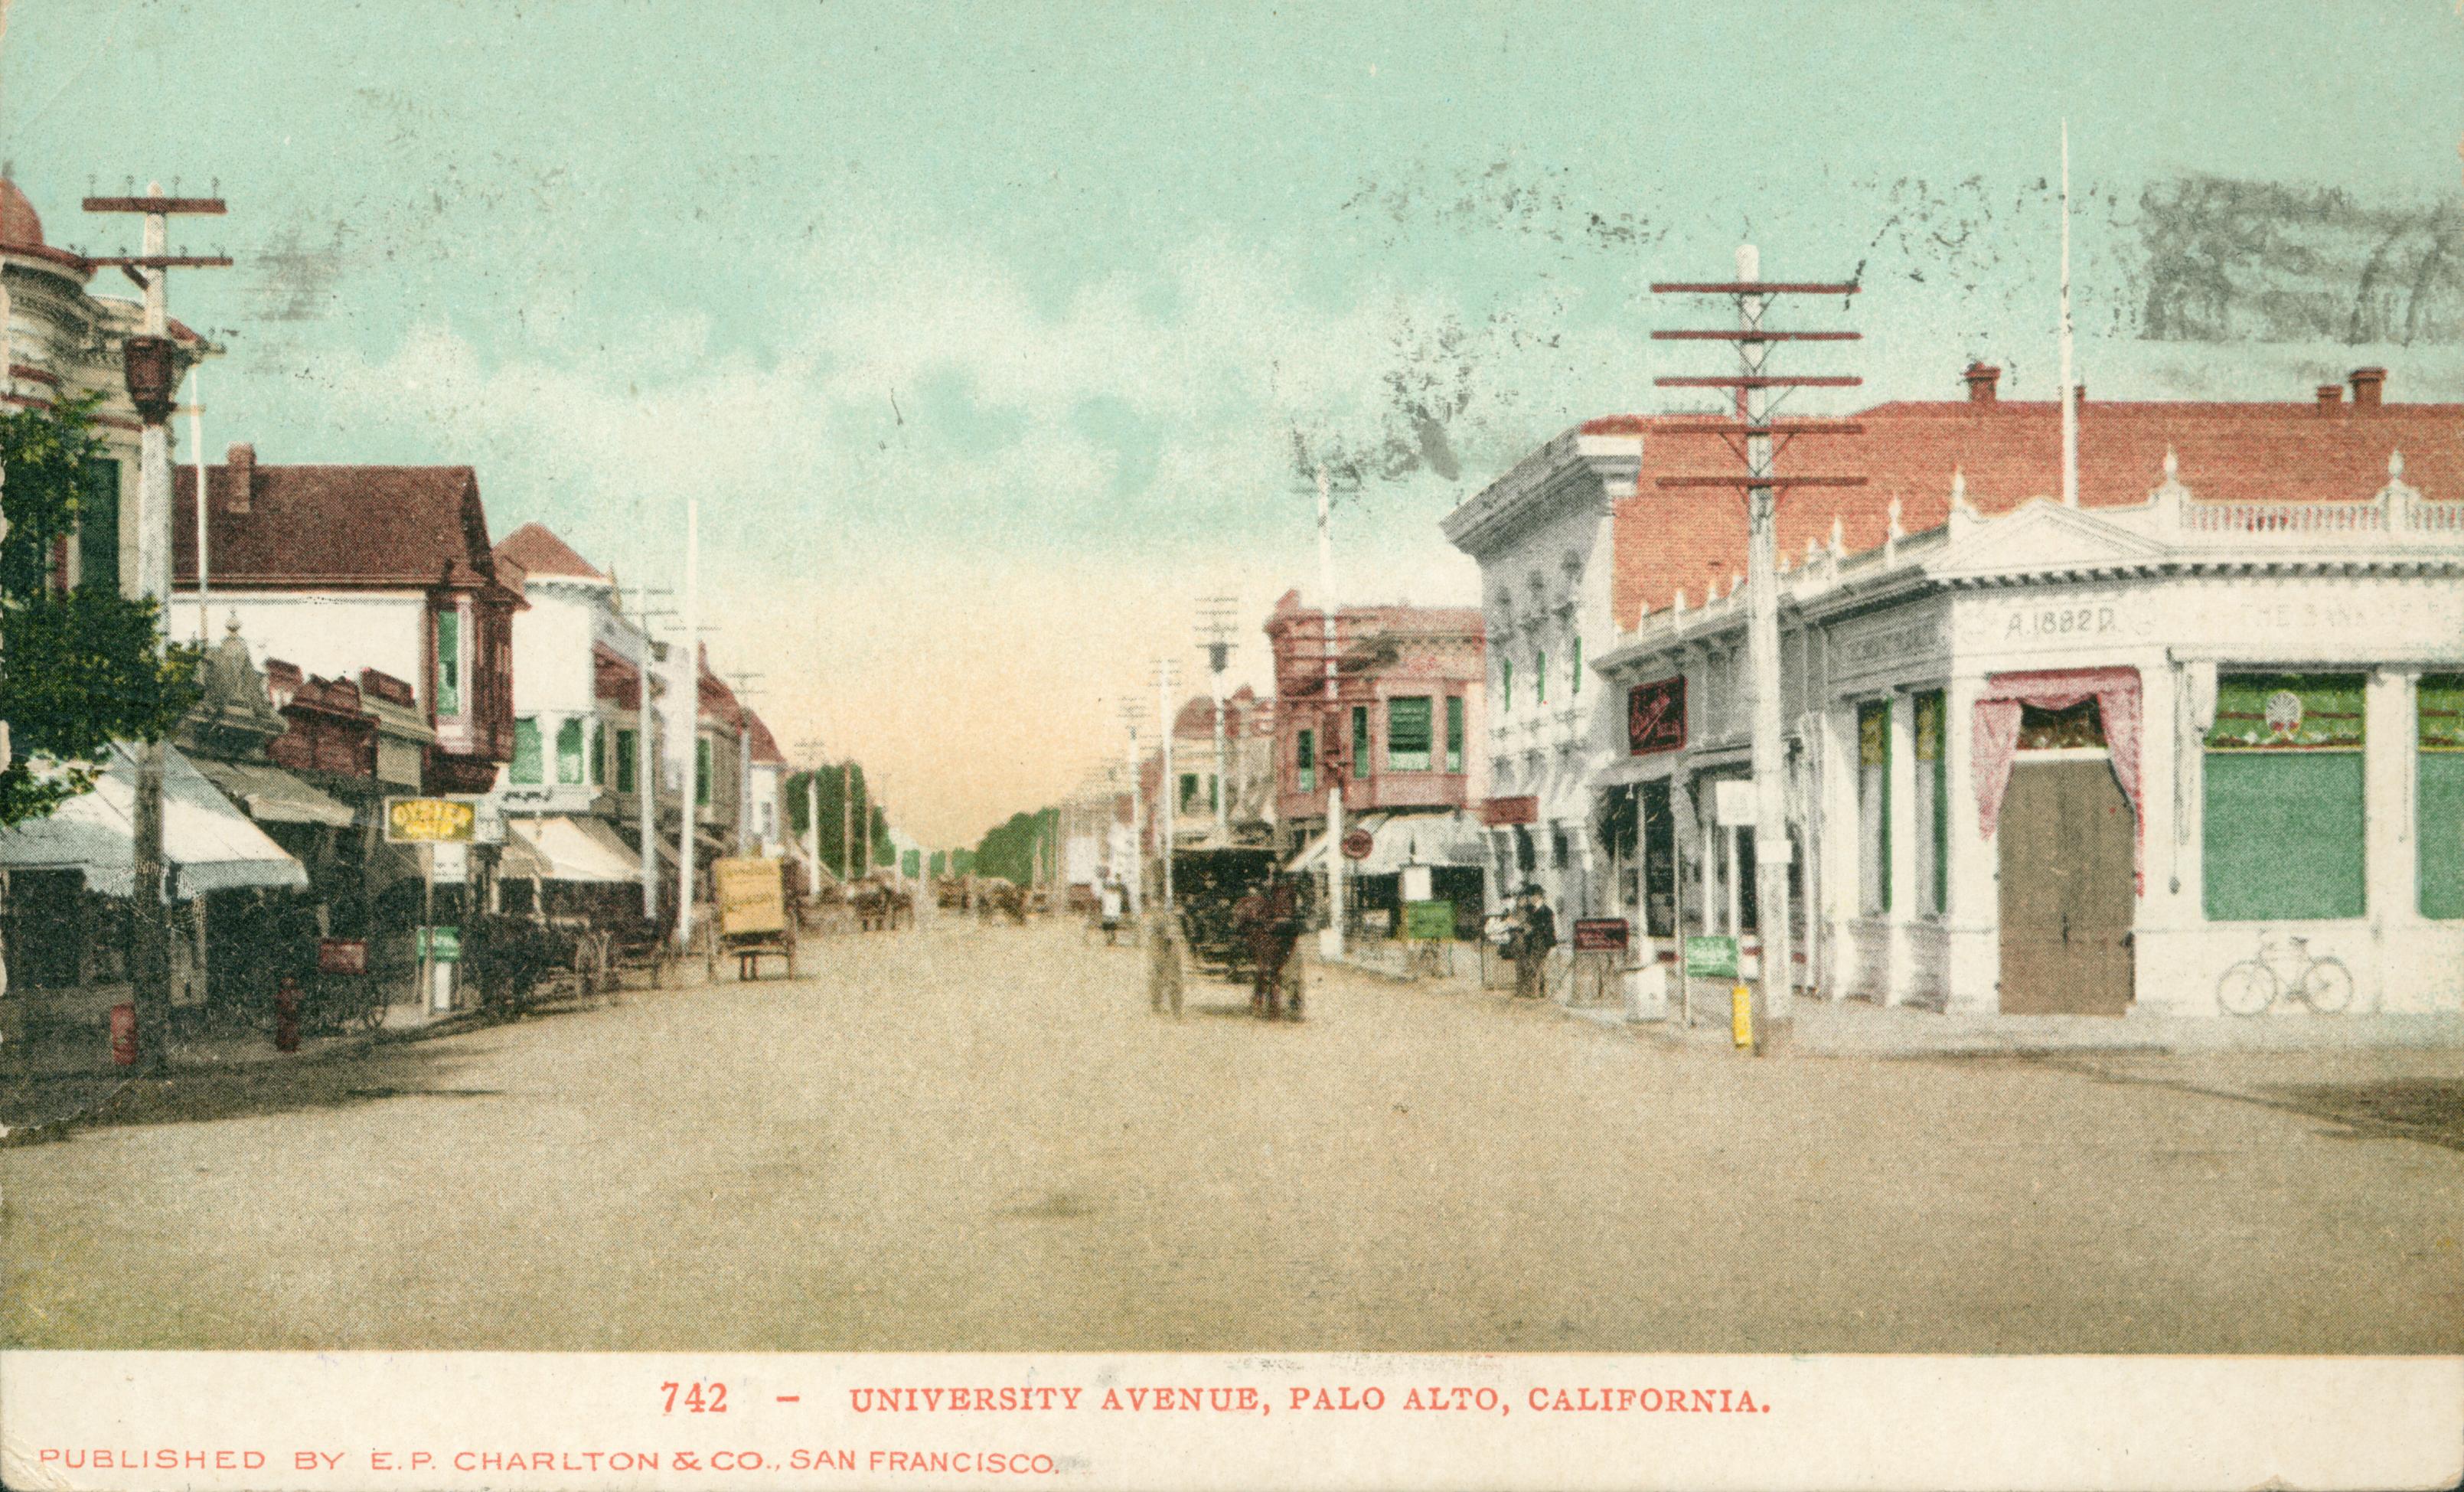 View of University Ave., buildings bordering the dirt road, electricity poles bordering the road on both sides, horse-drawn carriages traveling down the road